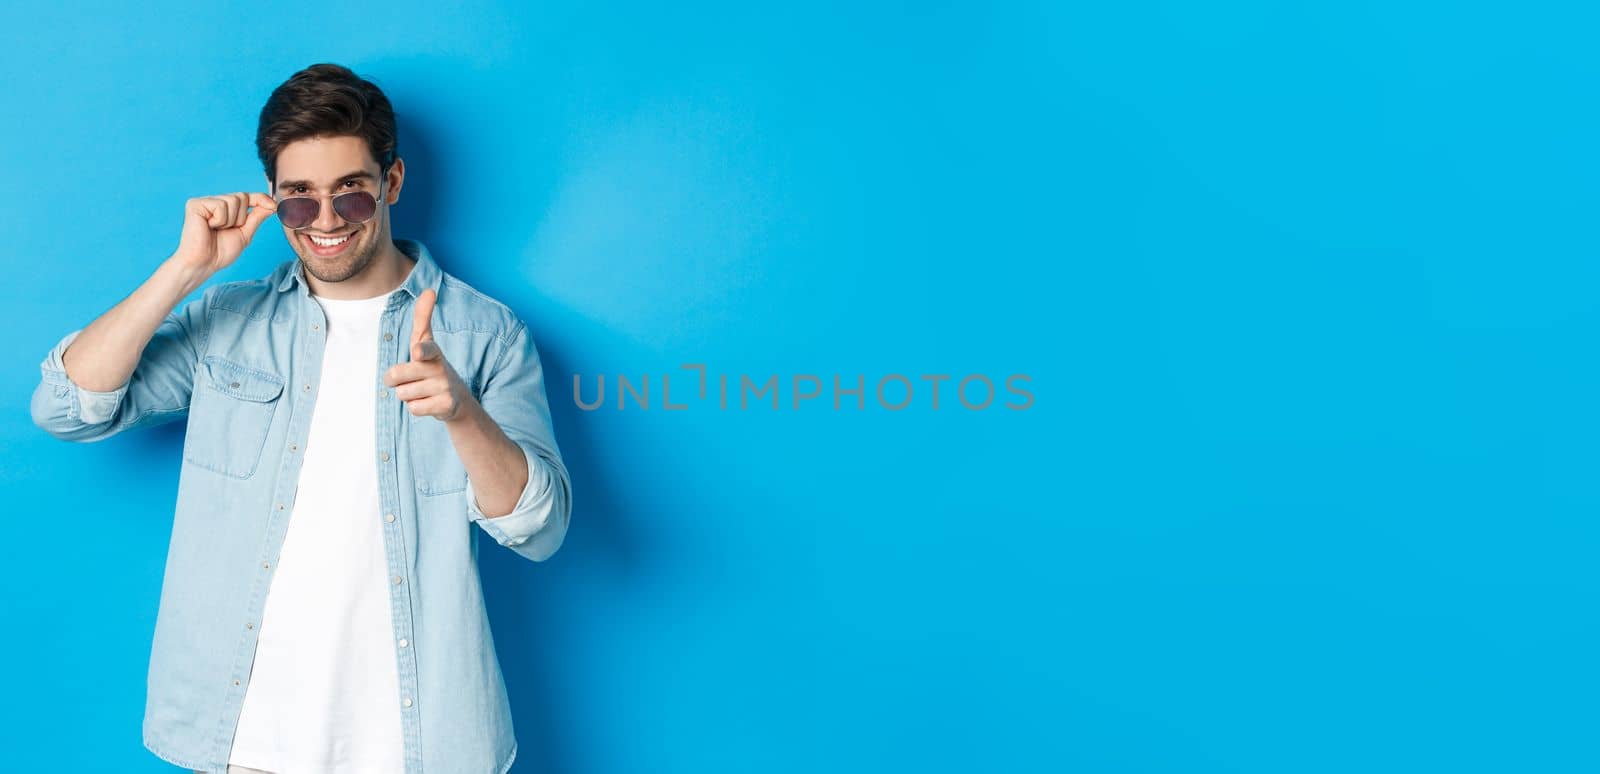 Handsome cheeky guy in sunglasses, smiling and pointing finger gun at camera, flirting with you, standing over blue background.